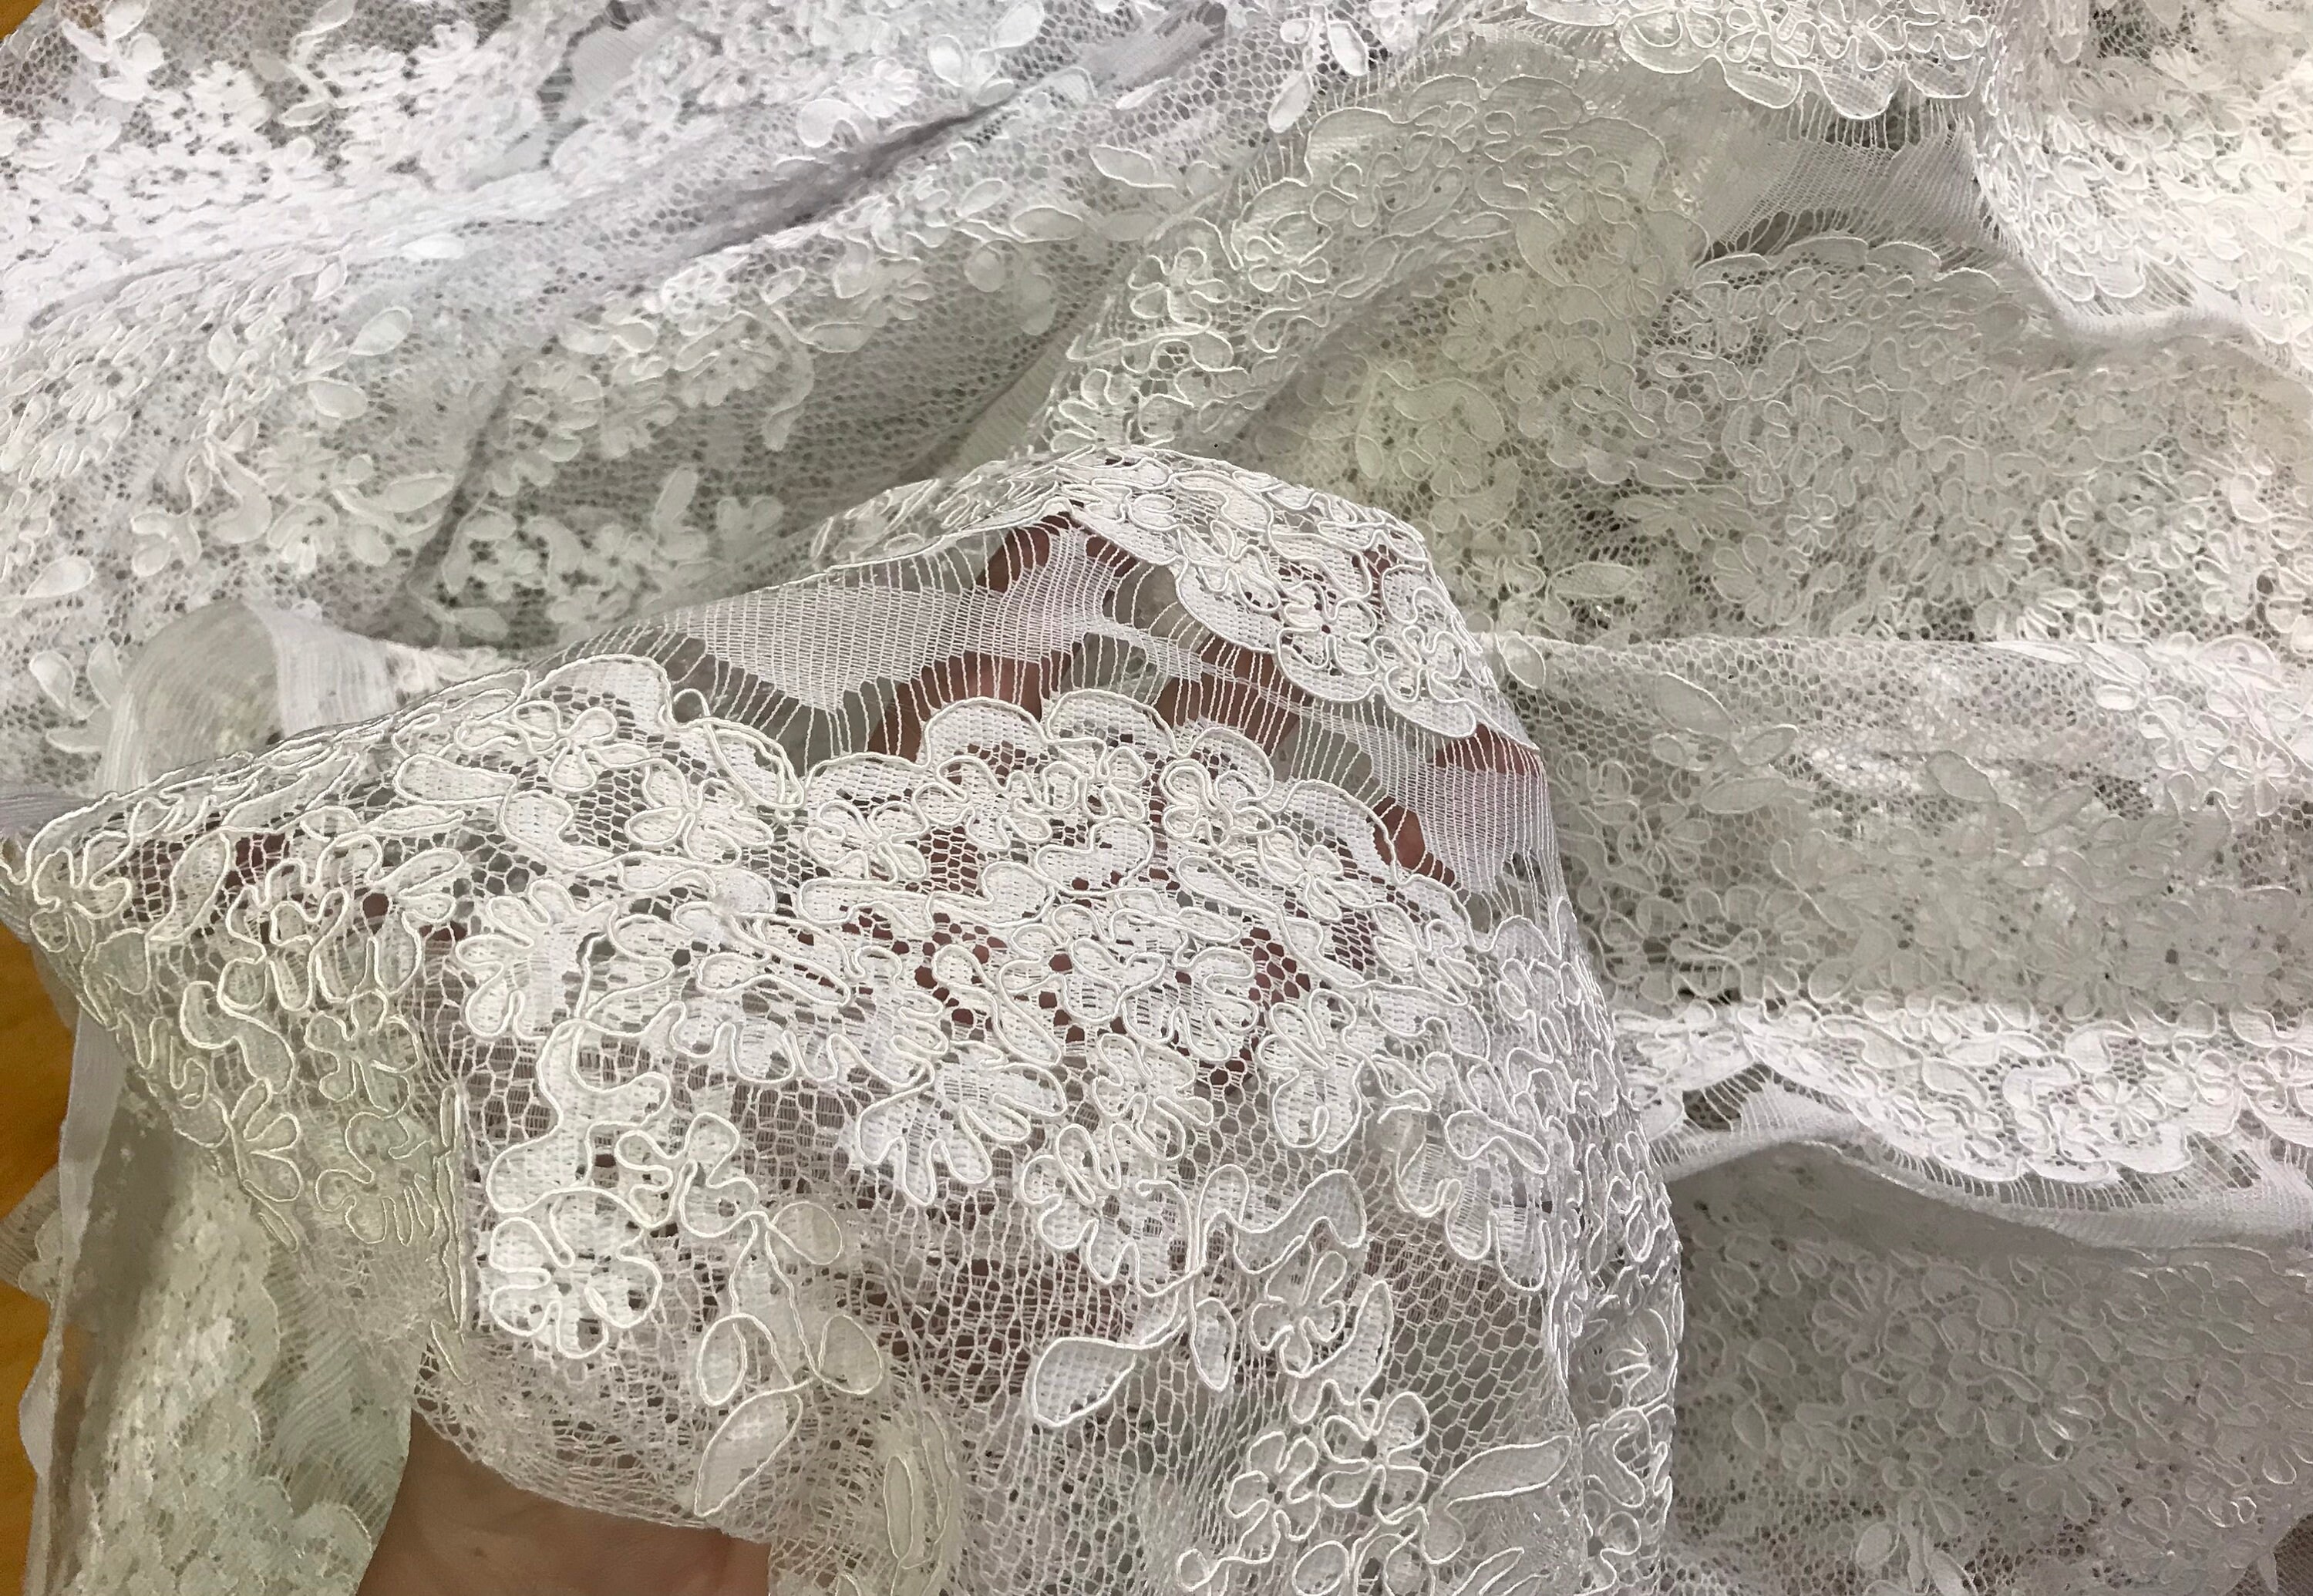 Scalloped lace fabric/wedding lace fabric/corded | Etsy